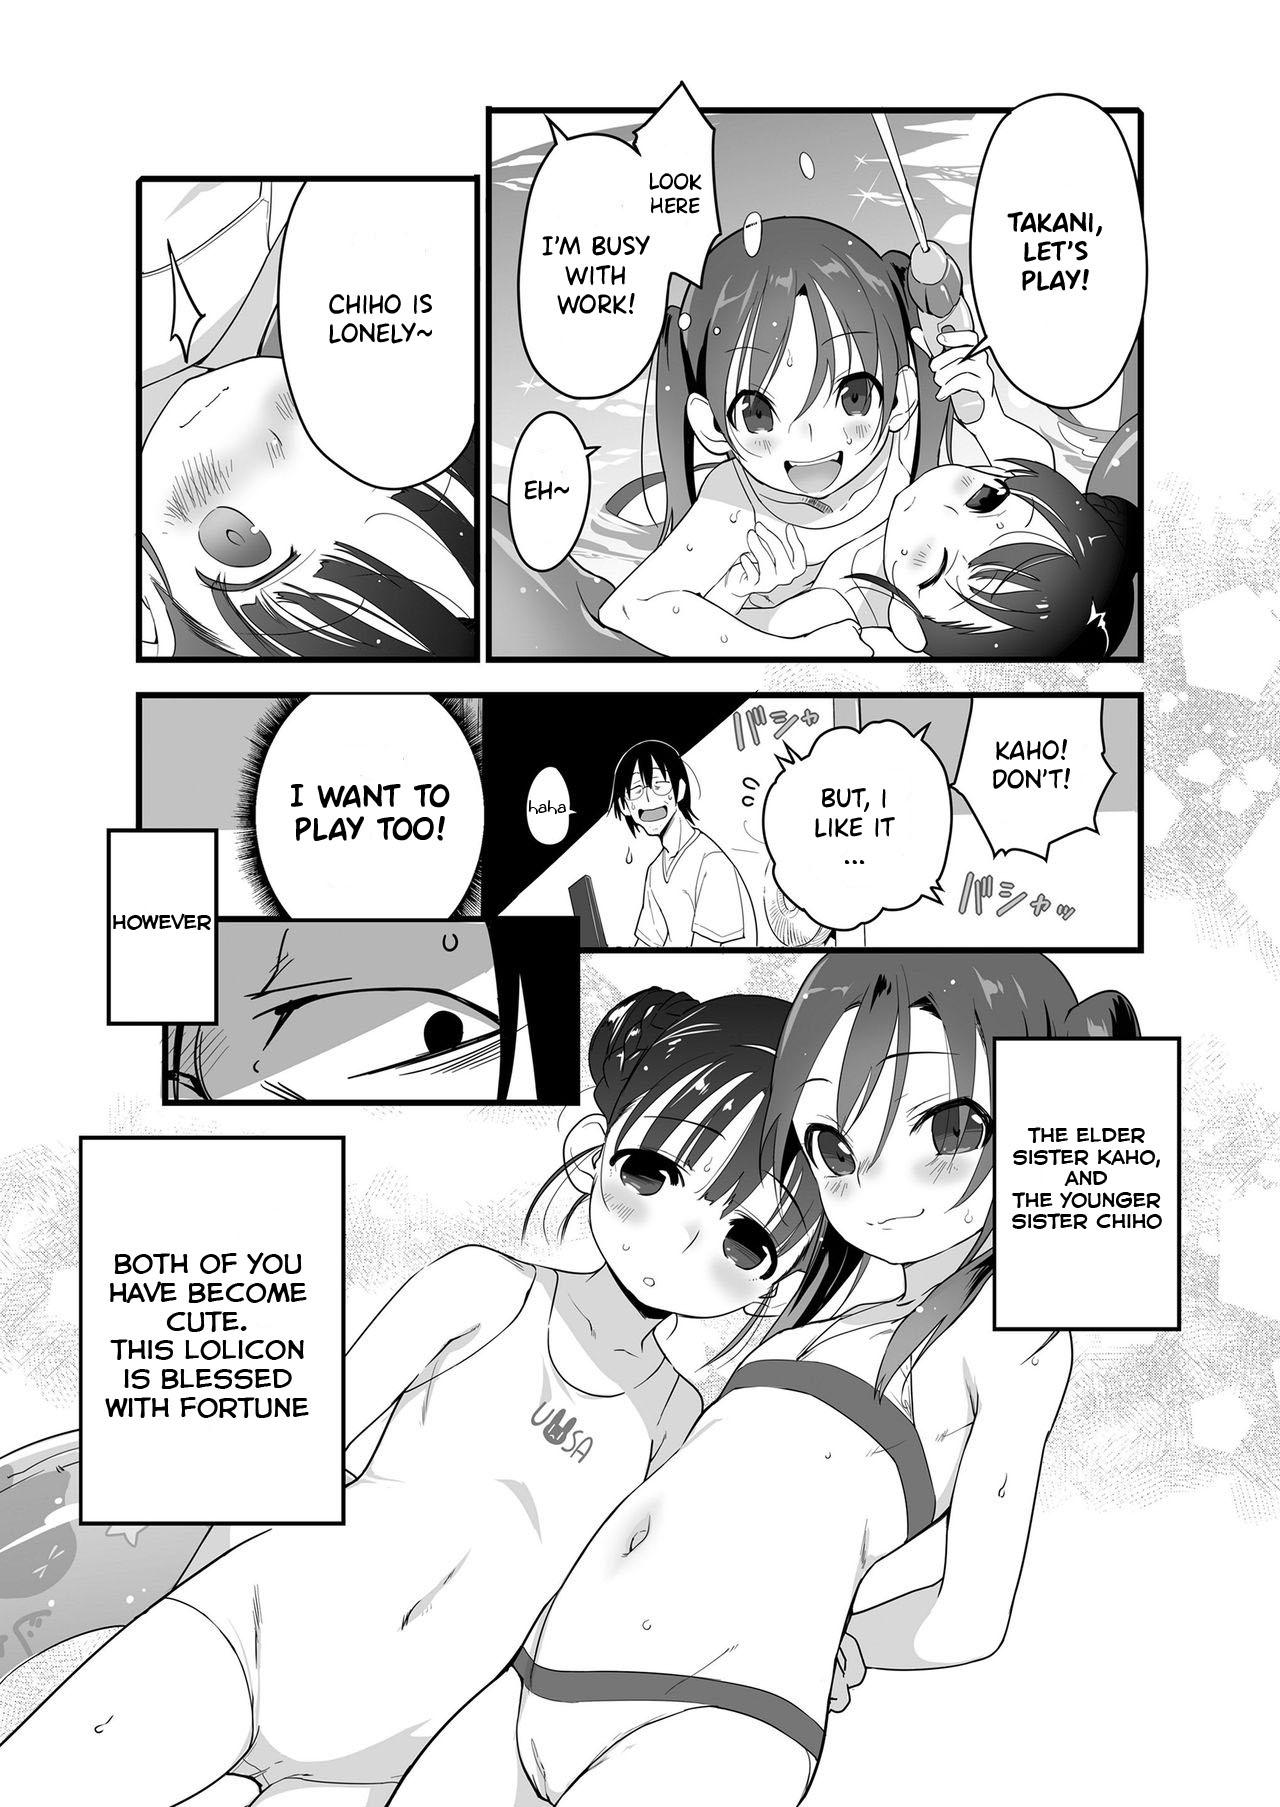 Ass Sex Uchiage Hanabi, Ane to Miruka? Imouto to Miruka? | Fireworks, Should we see it with the elder sister or the younger sister? Amador - Page 3